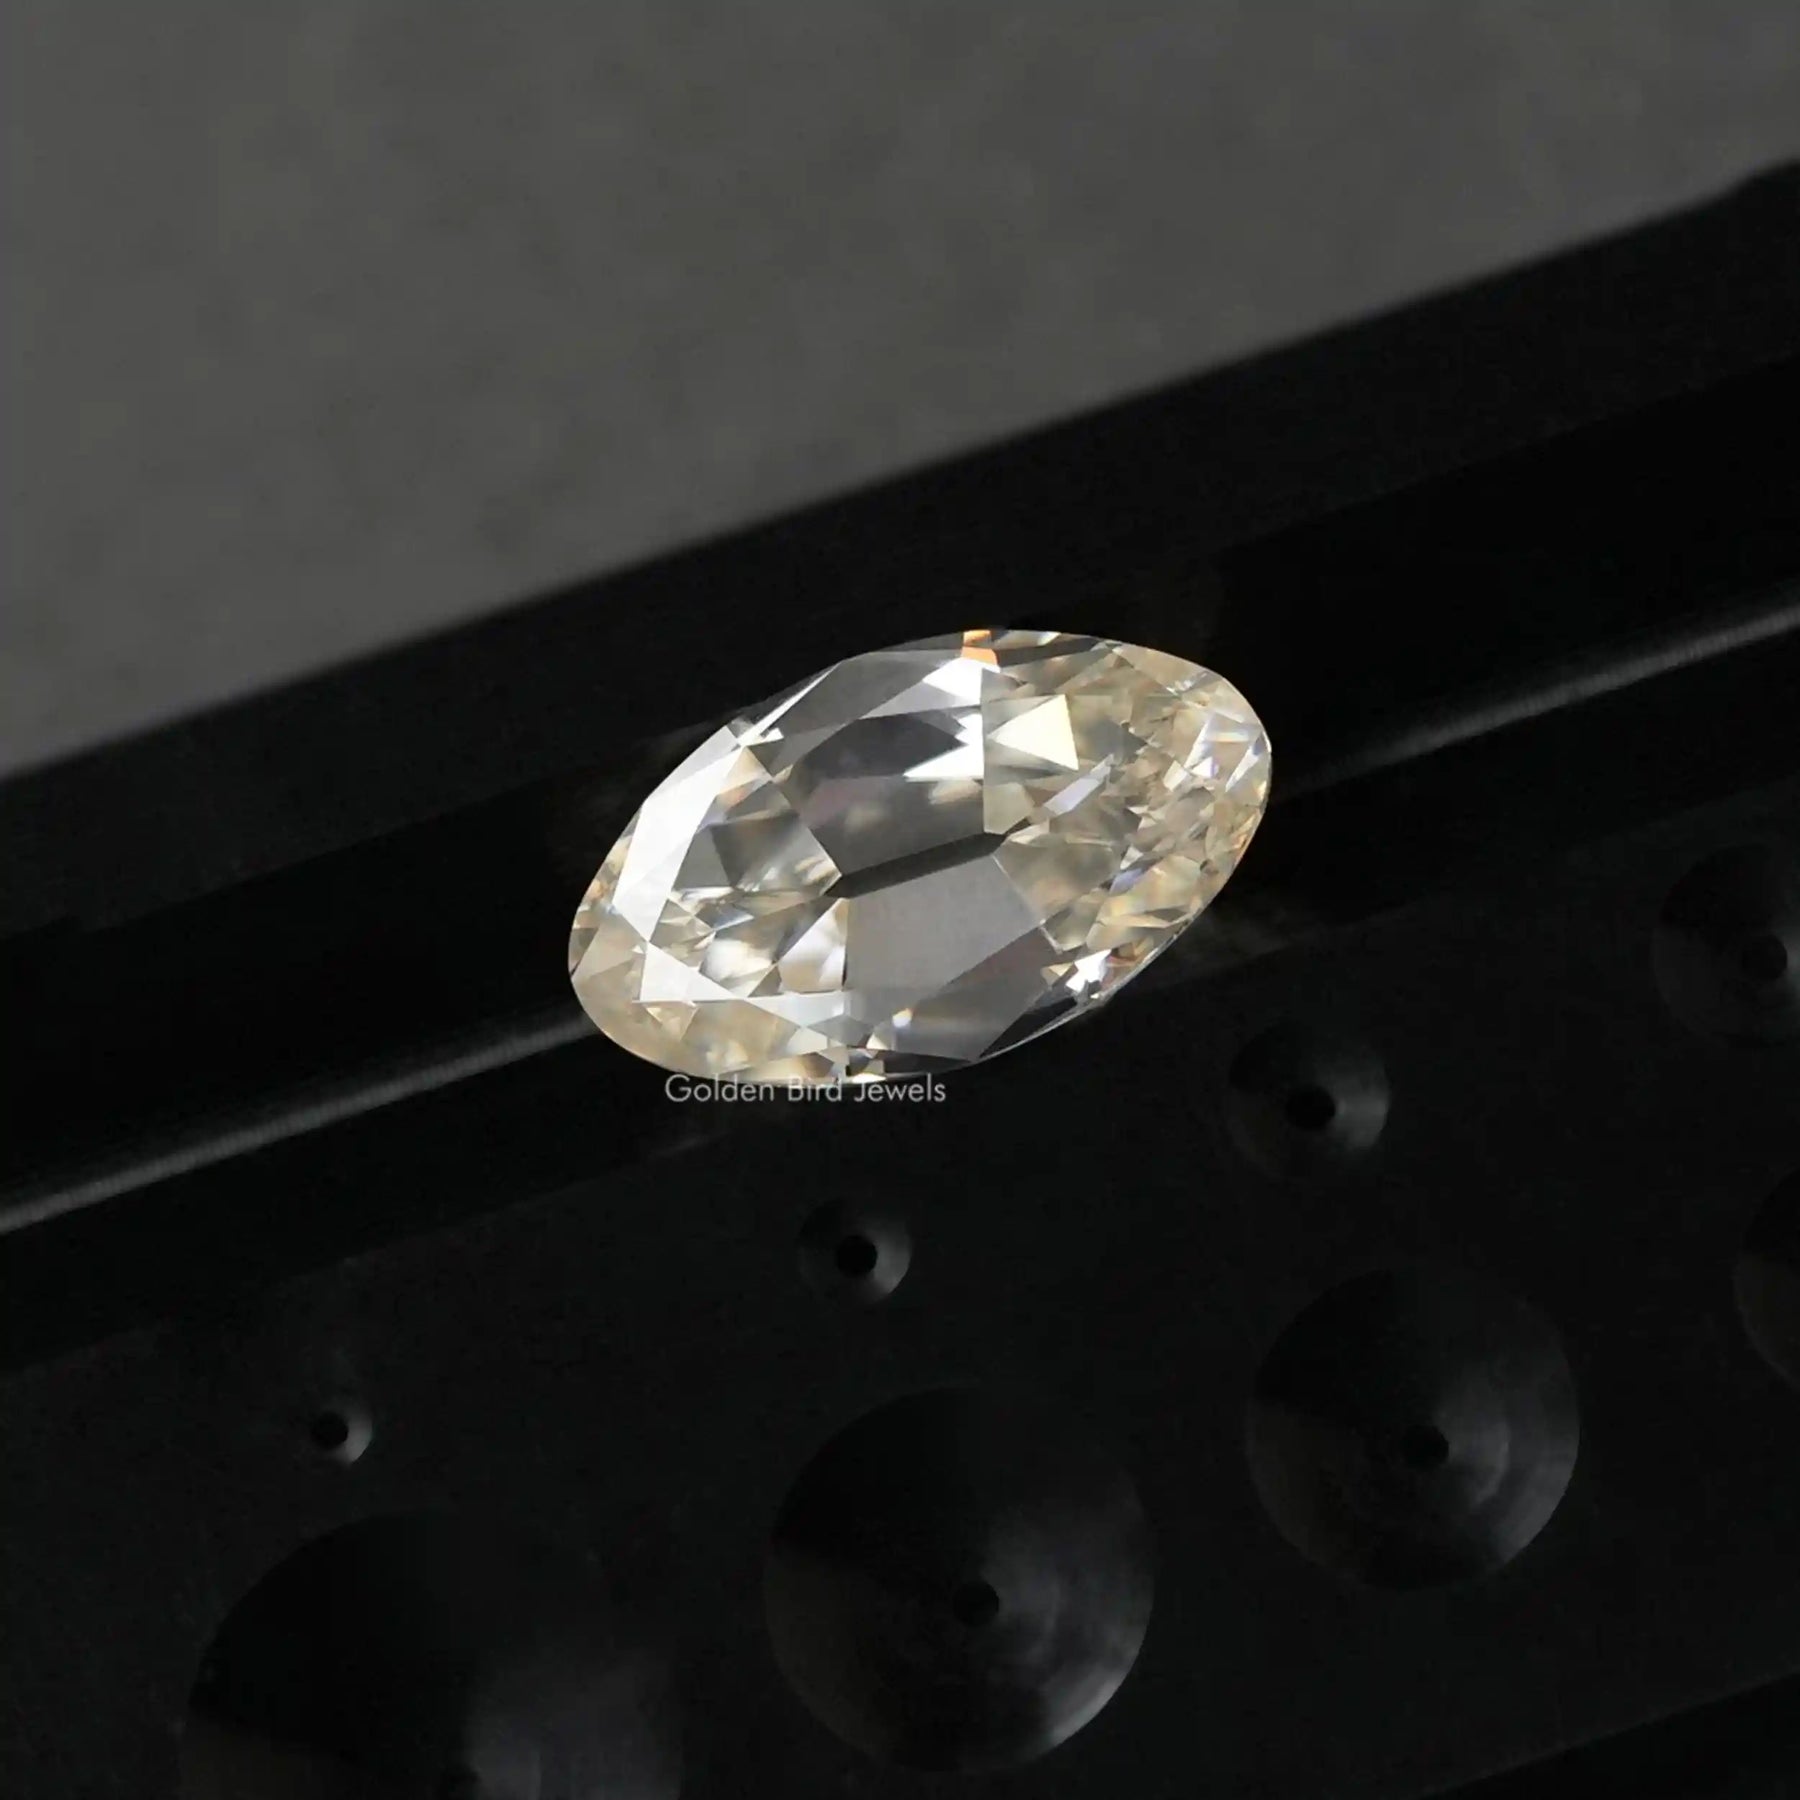 [Moval cut loose moissanite stone]-[Golden Bird Jewels]